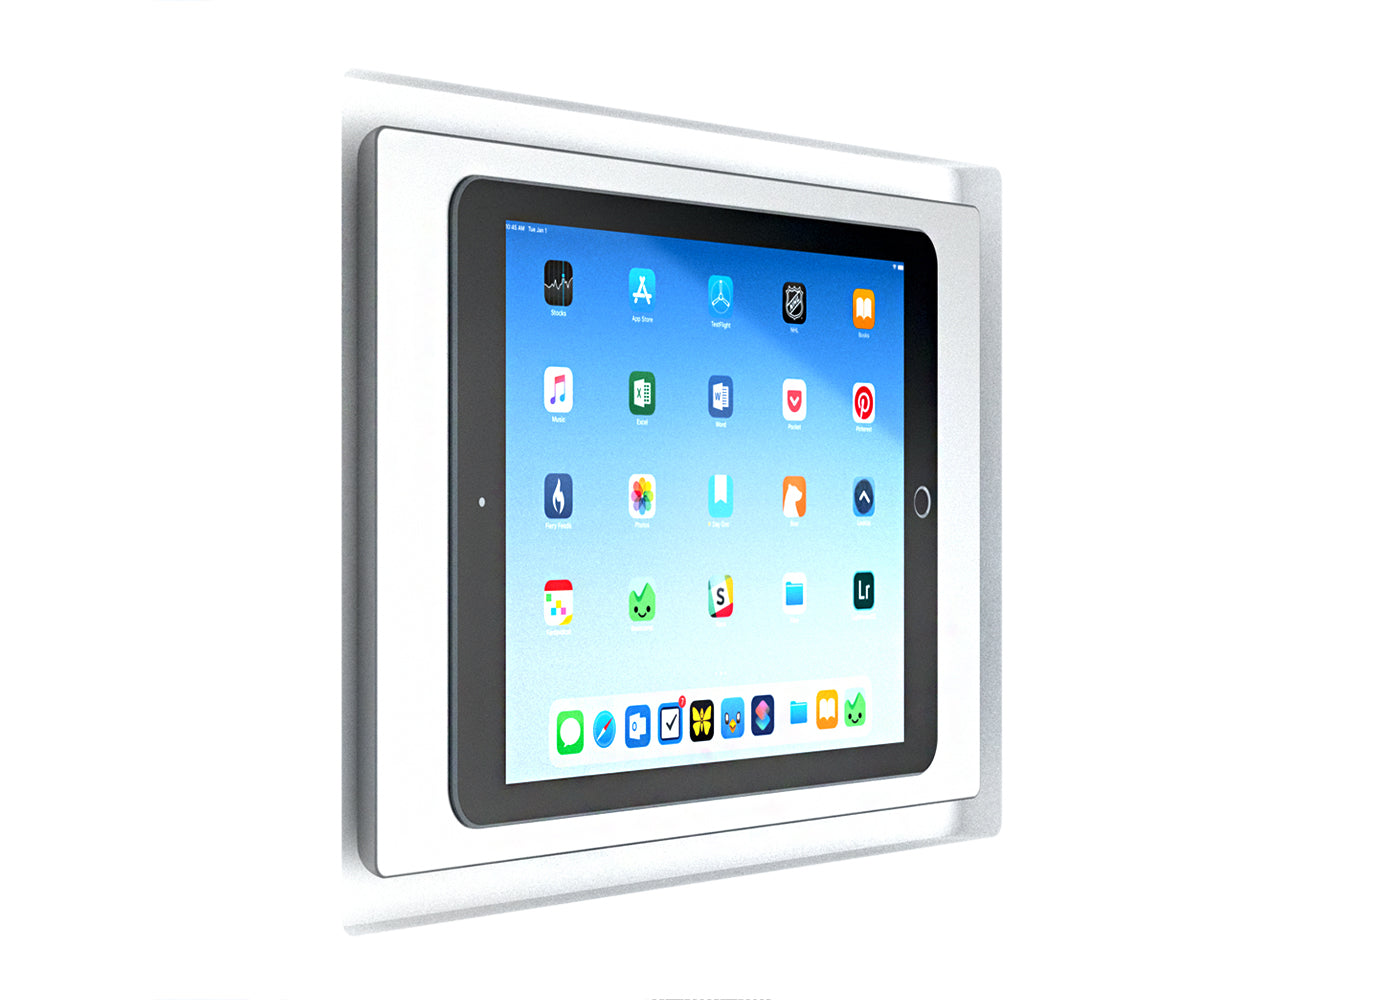 SLD-IPS-500 iPad Designer Style In-Wall Platform (Small). Small iPad Designer Style In-Wall Plaster Mounting Platform by SeeLess, designed for seamless integration of 7” iPads, enhancing smart device control.